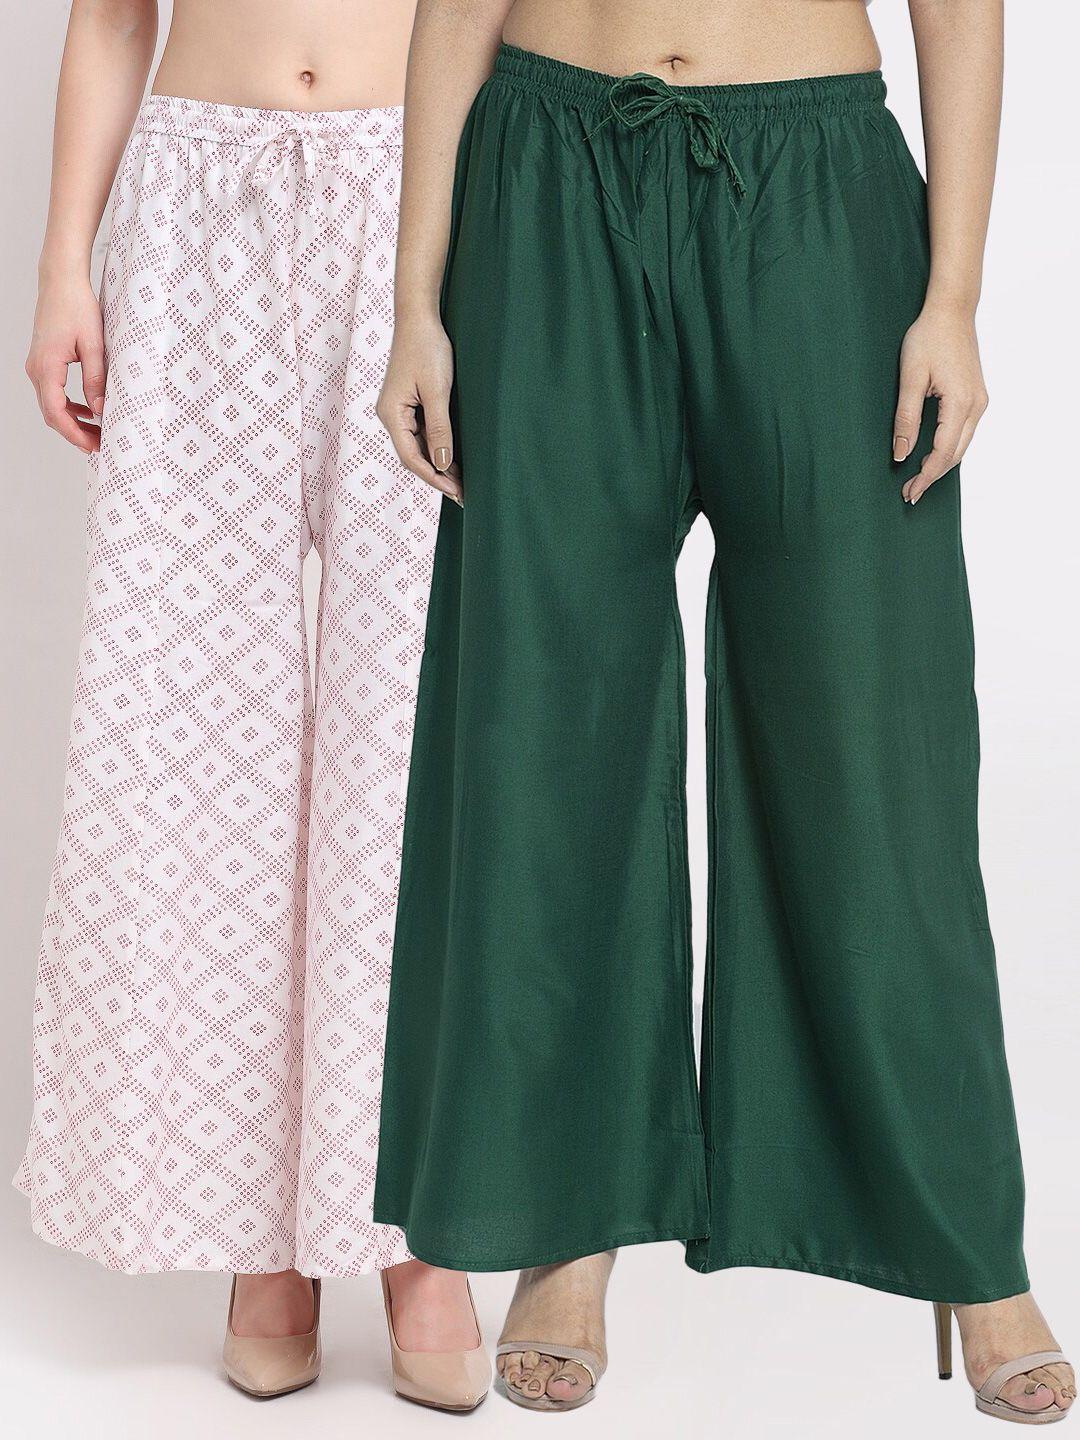 jinfo women pack of 2 green & white printed flared knitted ethnic palazzos